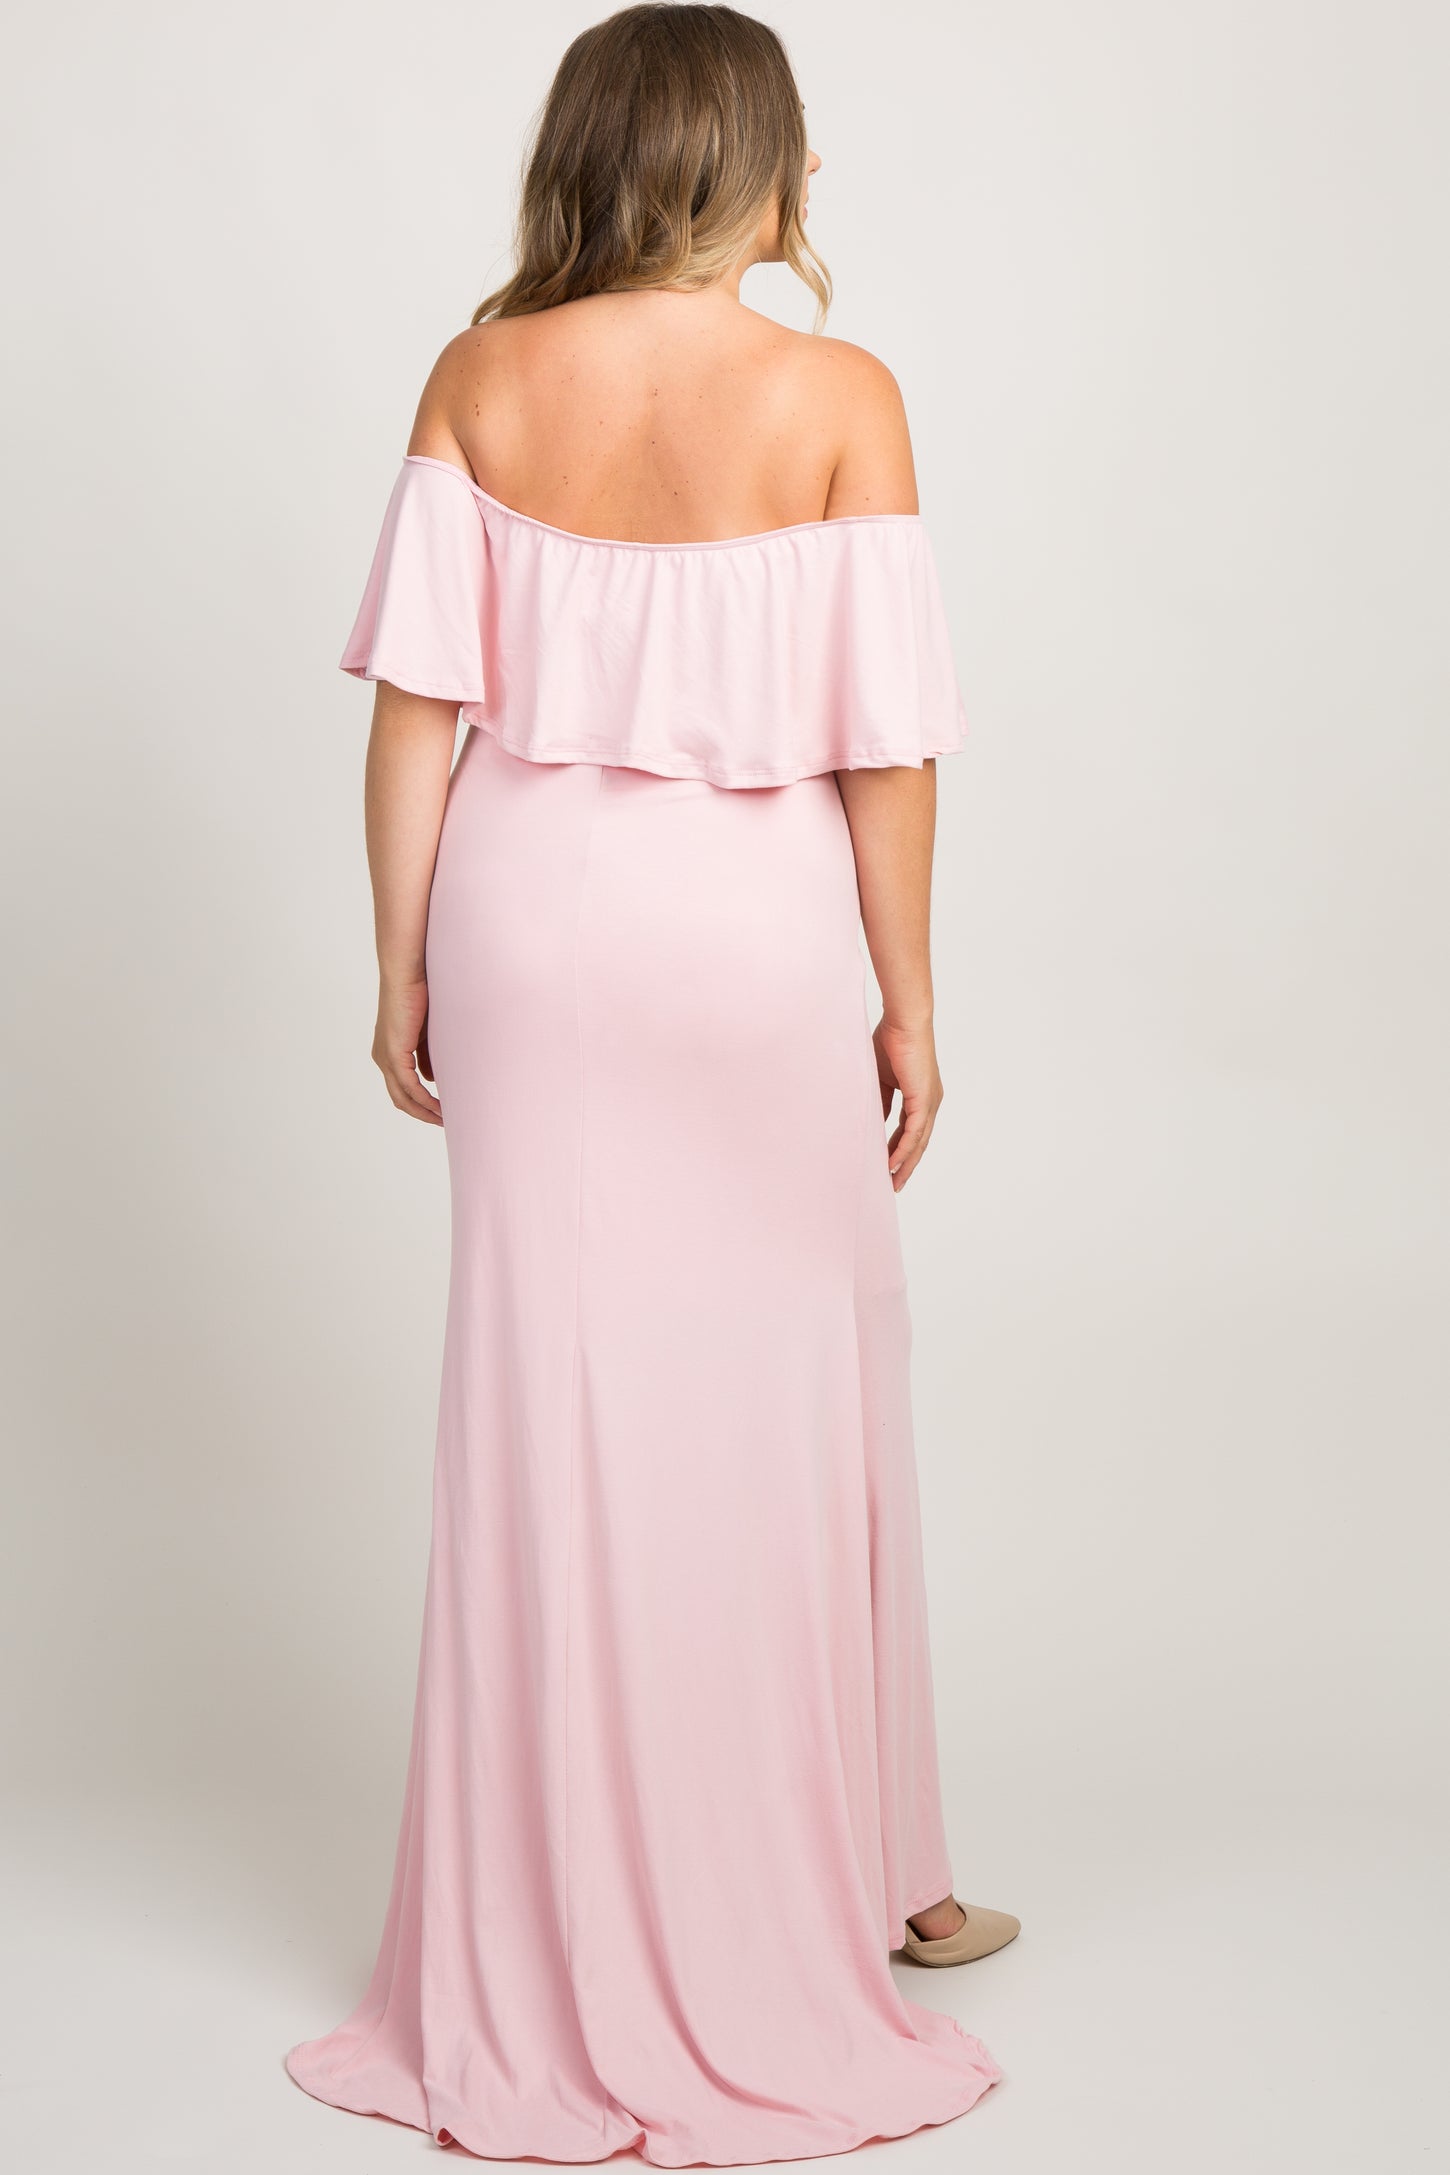 Pink Ruffle Off Shoulder Mermaid Plus Maternity Photoshoot Gown/Dress